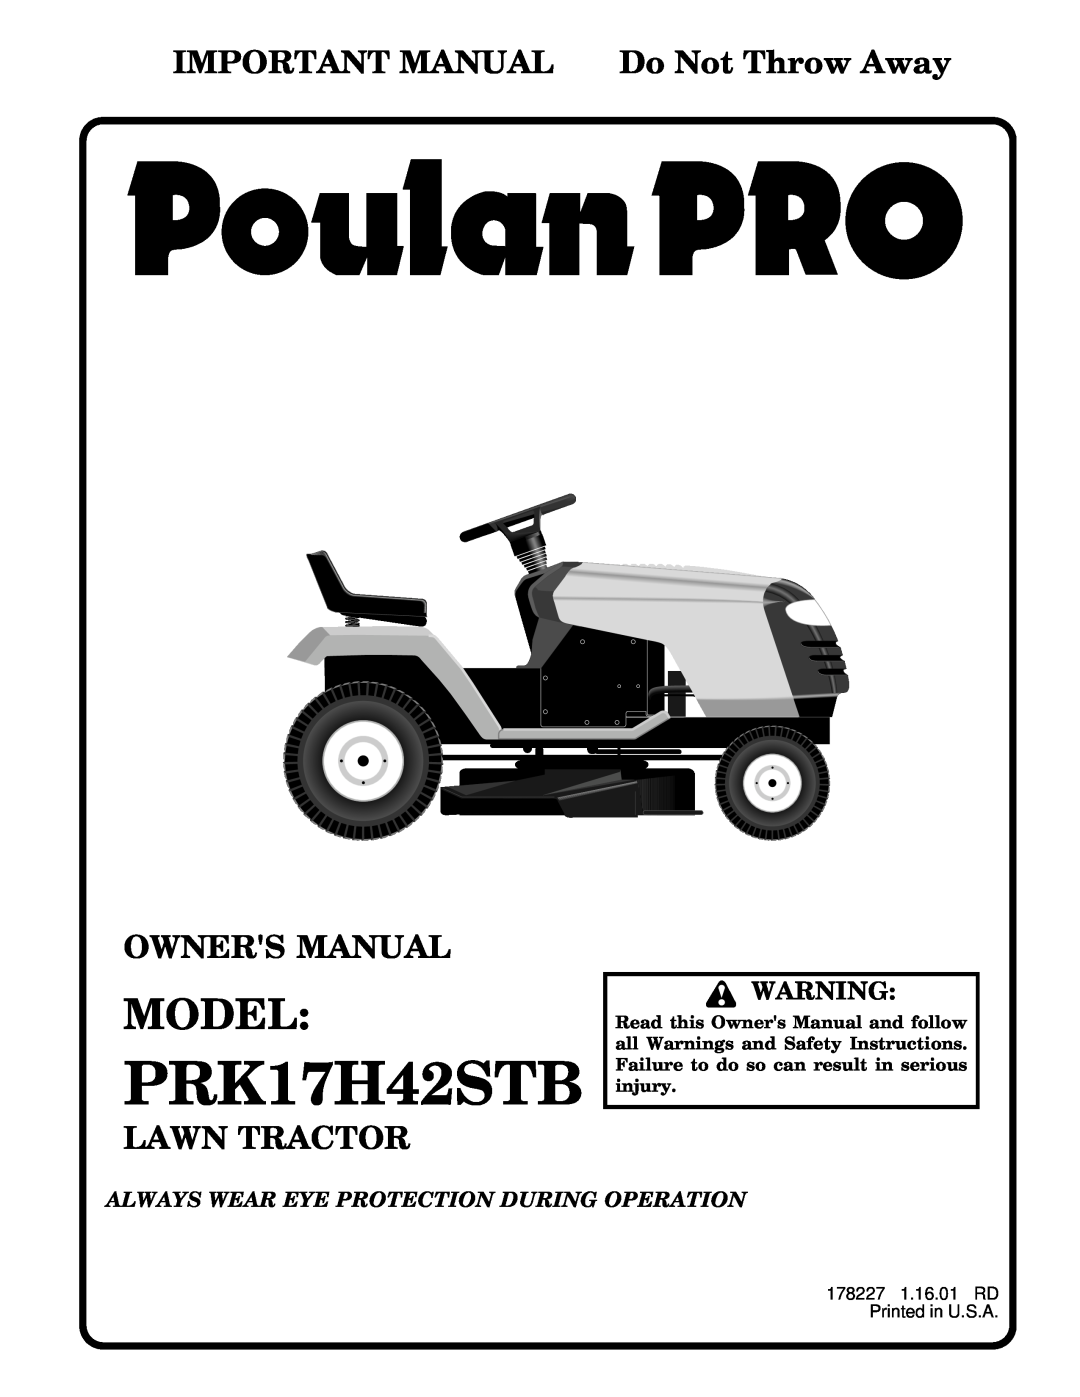 Poulan PRK17H42STB owner manual Model, IMPORTANT MANUAL Do Not Throw Away, Lawn Tractor 